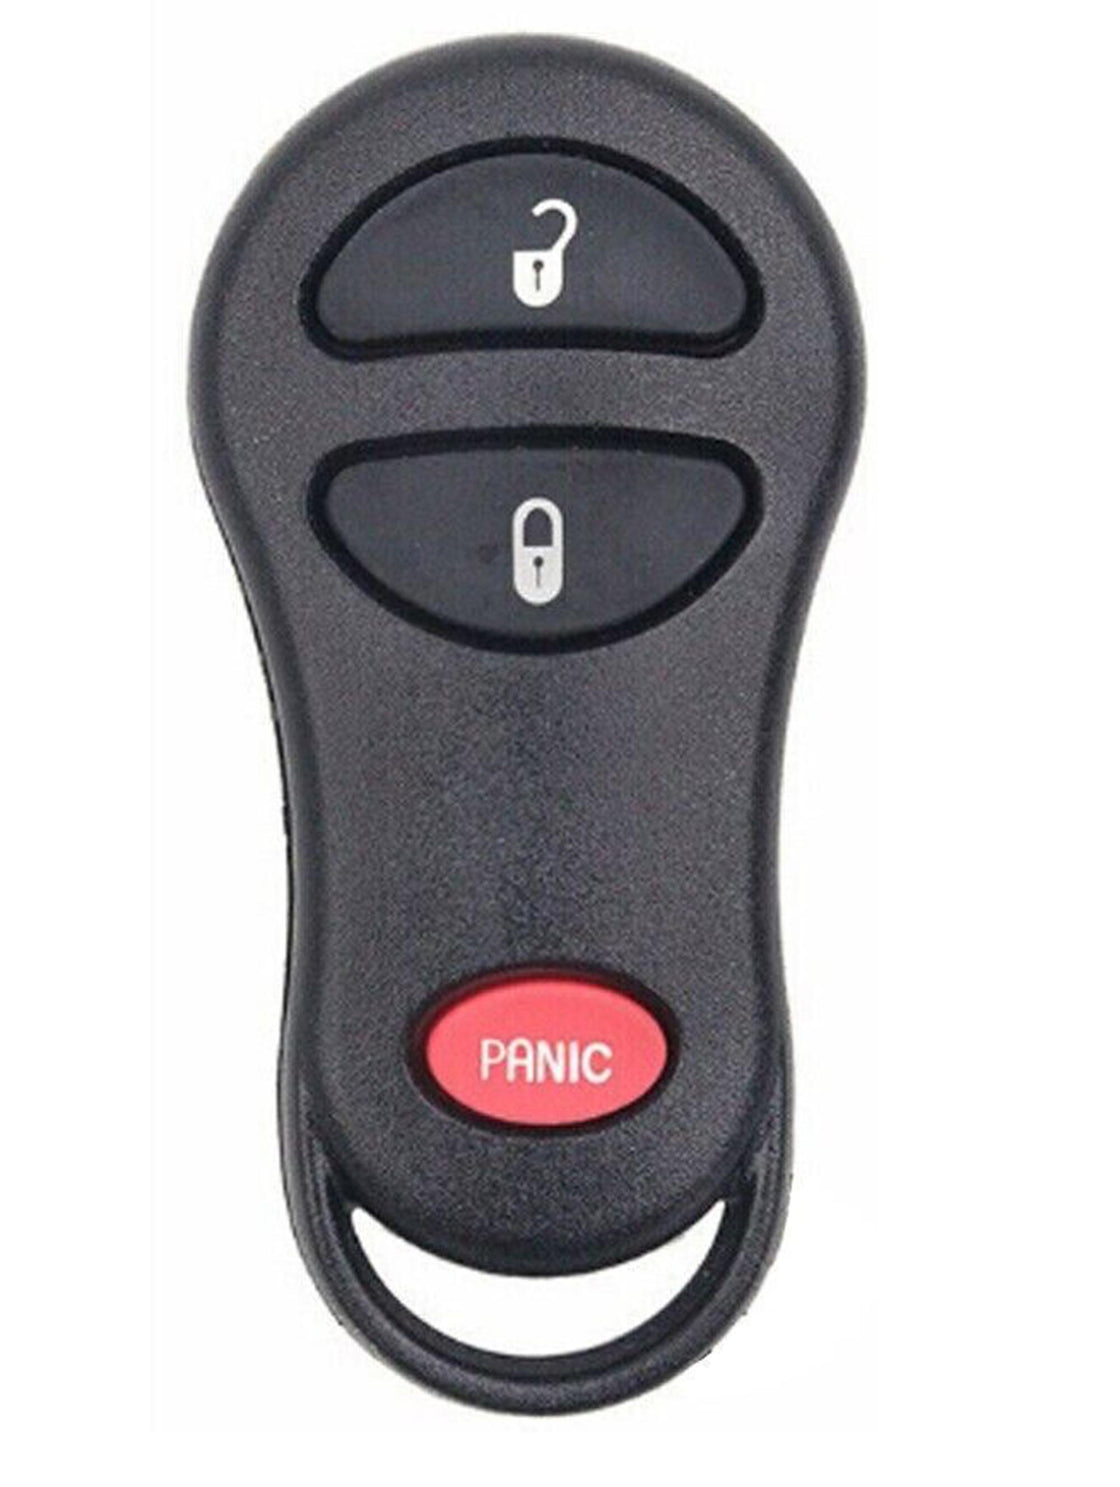 1x New Replacement Remote Key Fob SHELL / CASE For Chrysler Dodge Plymouth Jeep (No Electronics or Chip Inside)